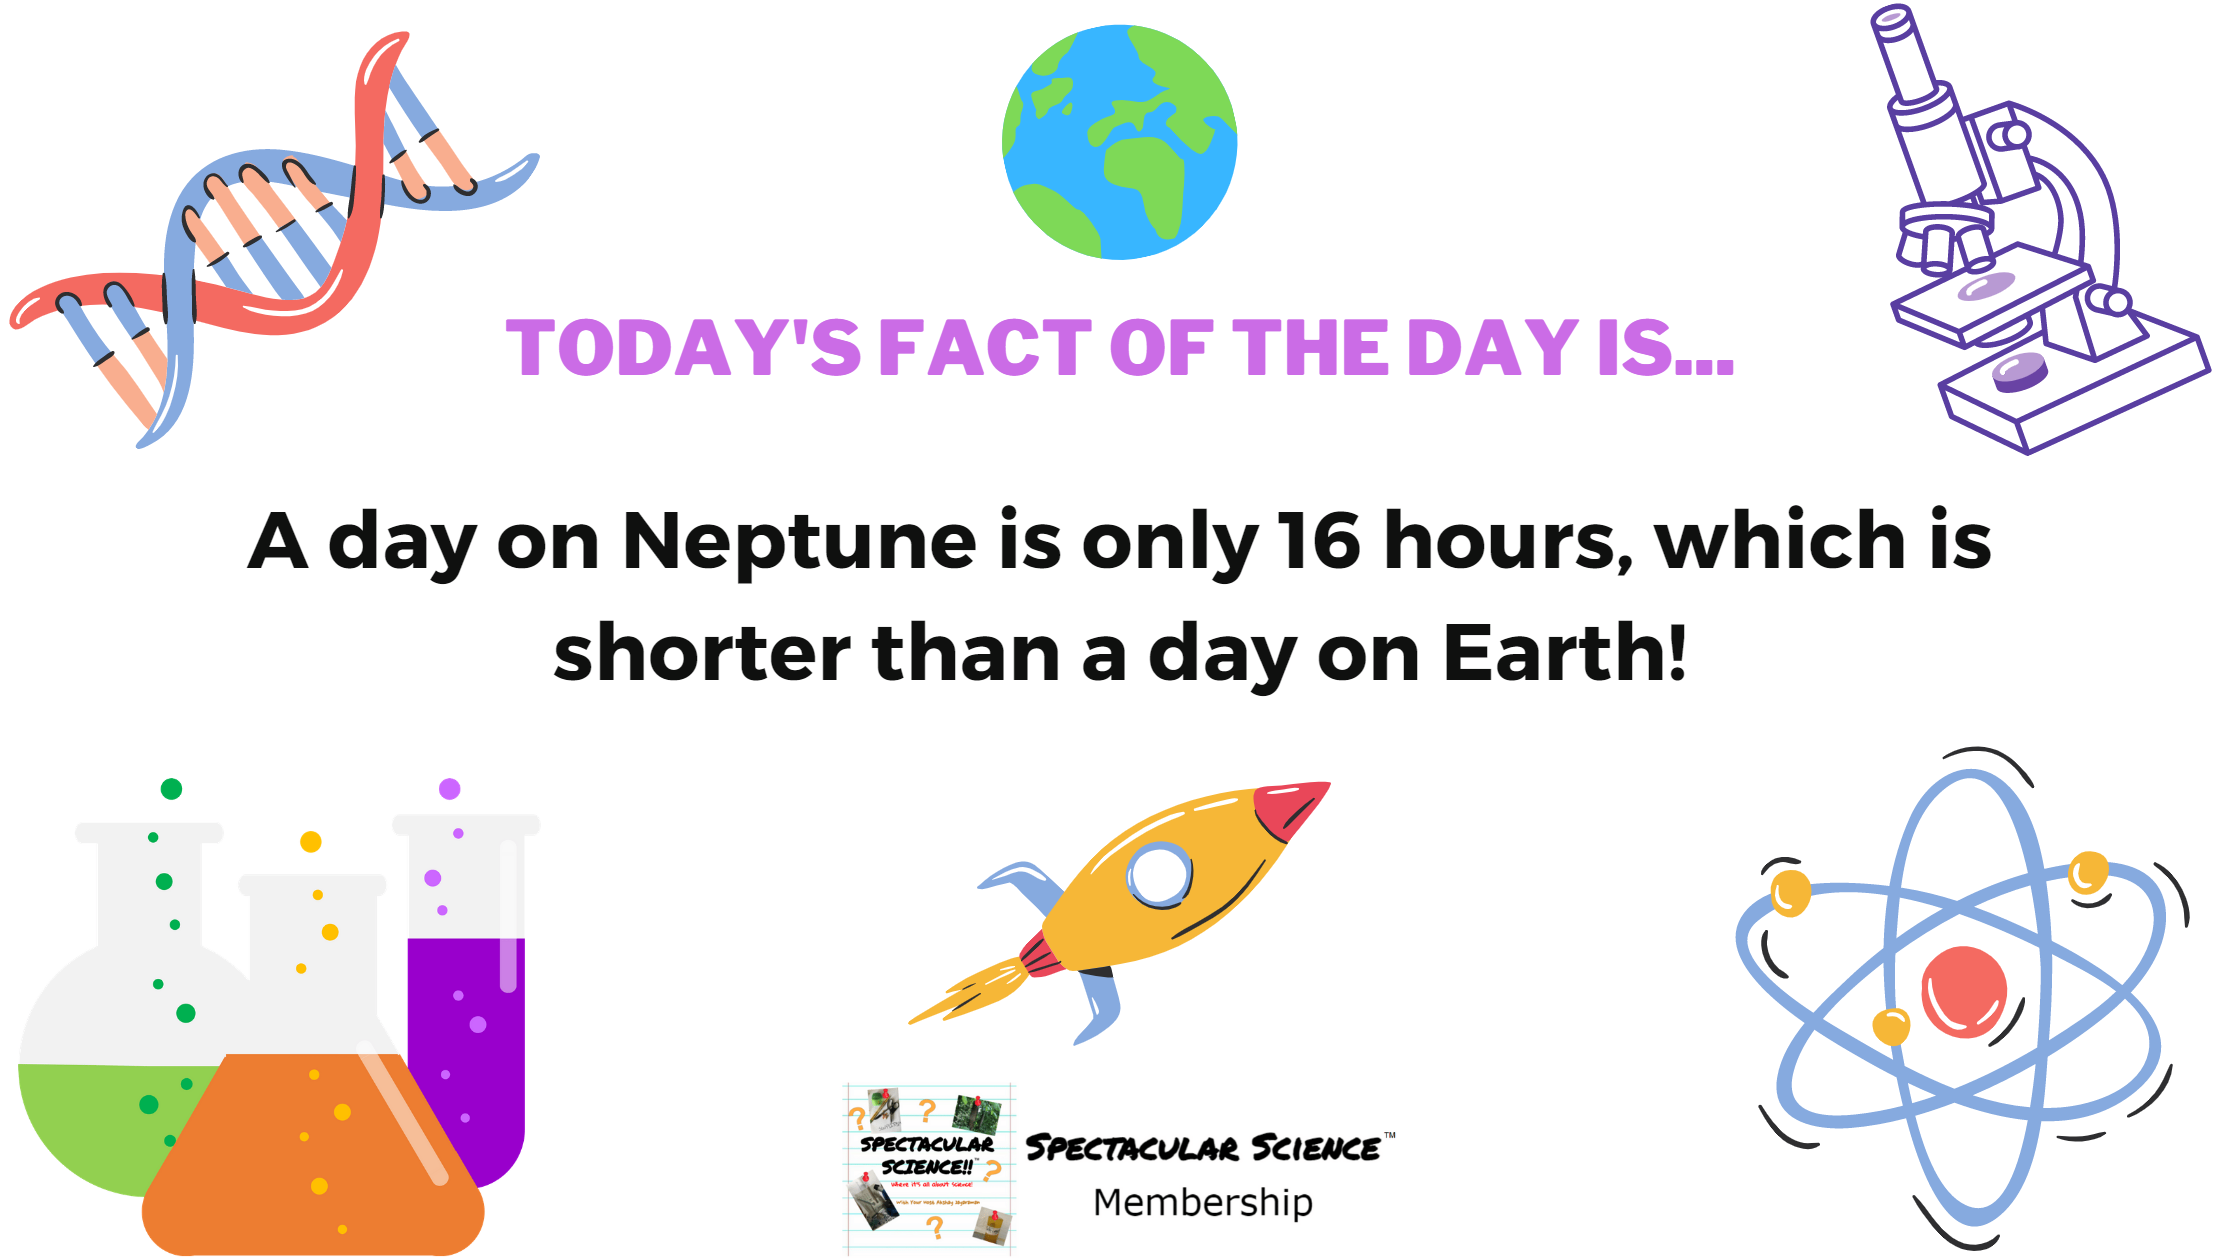 Fact of the Day Image May 4